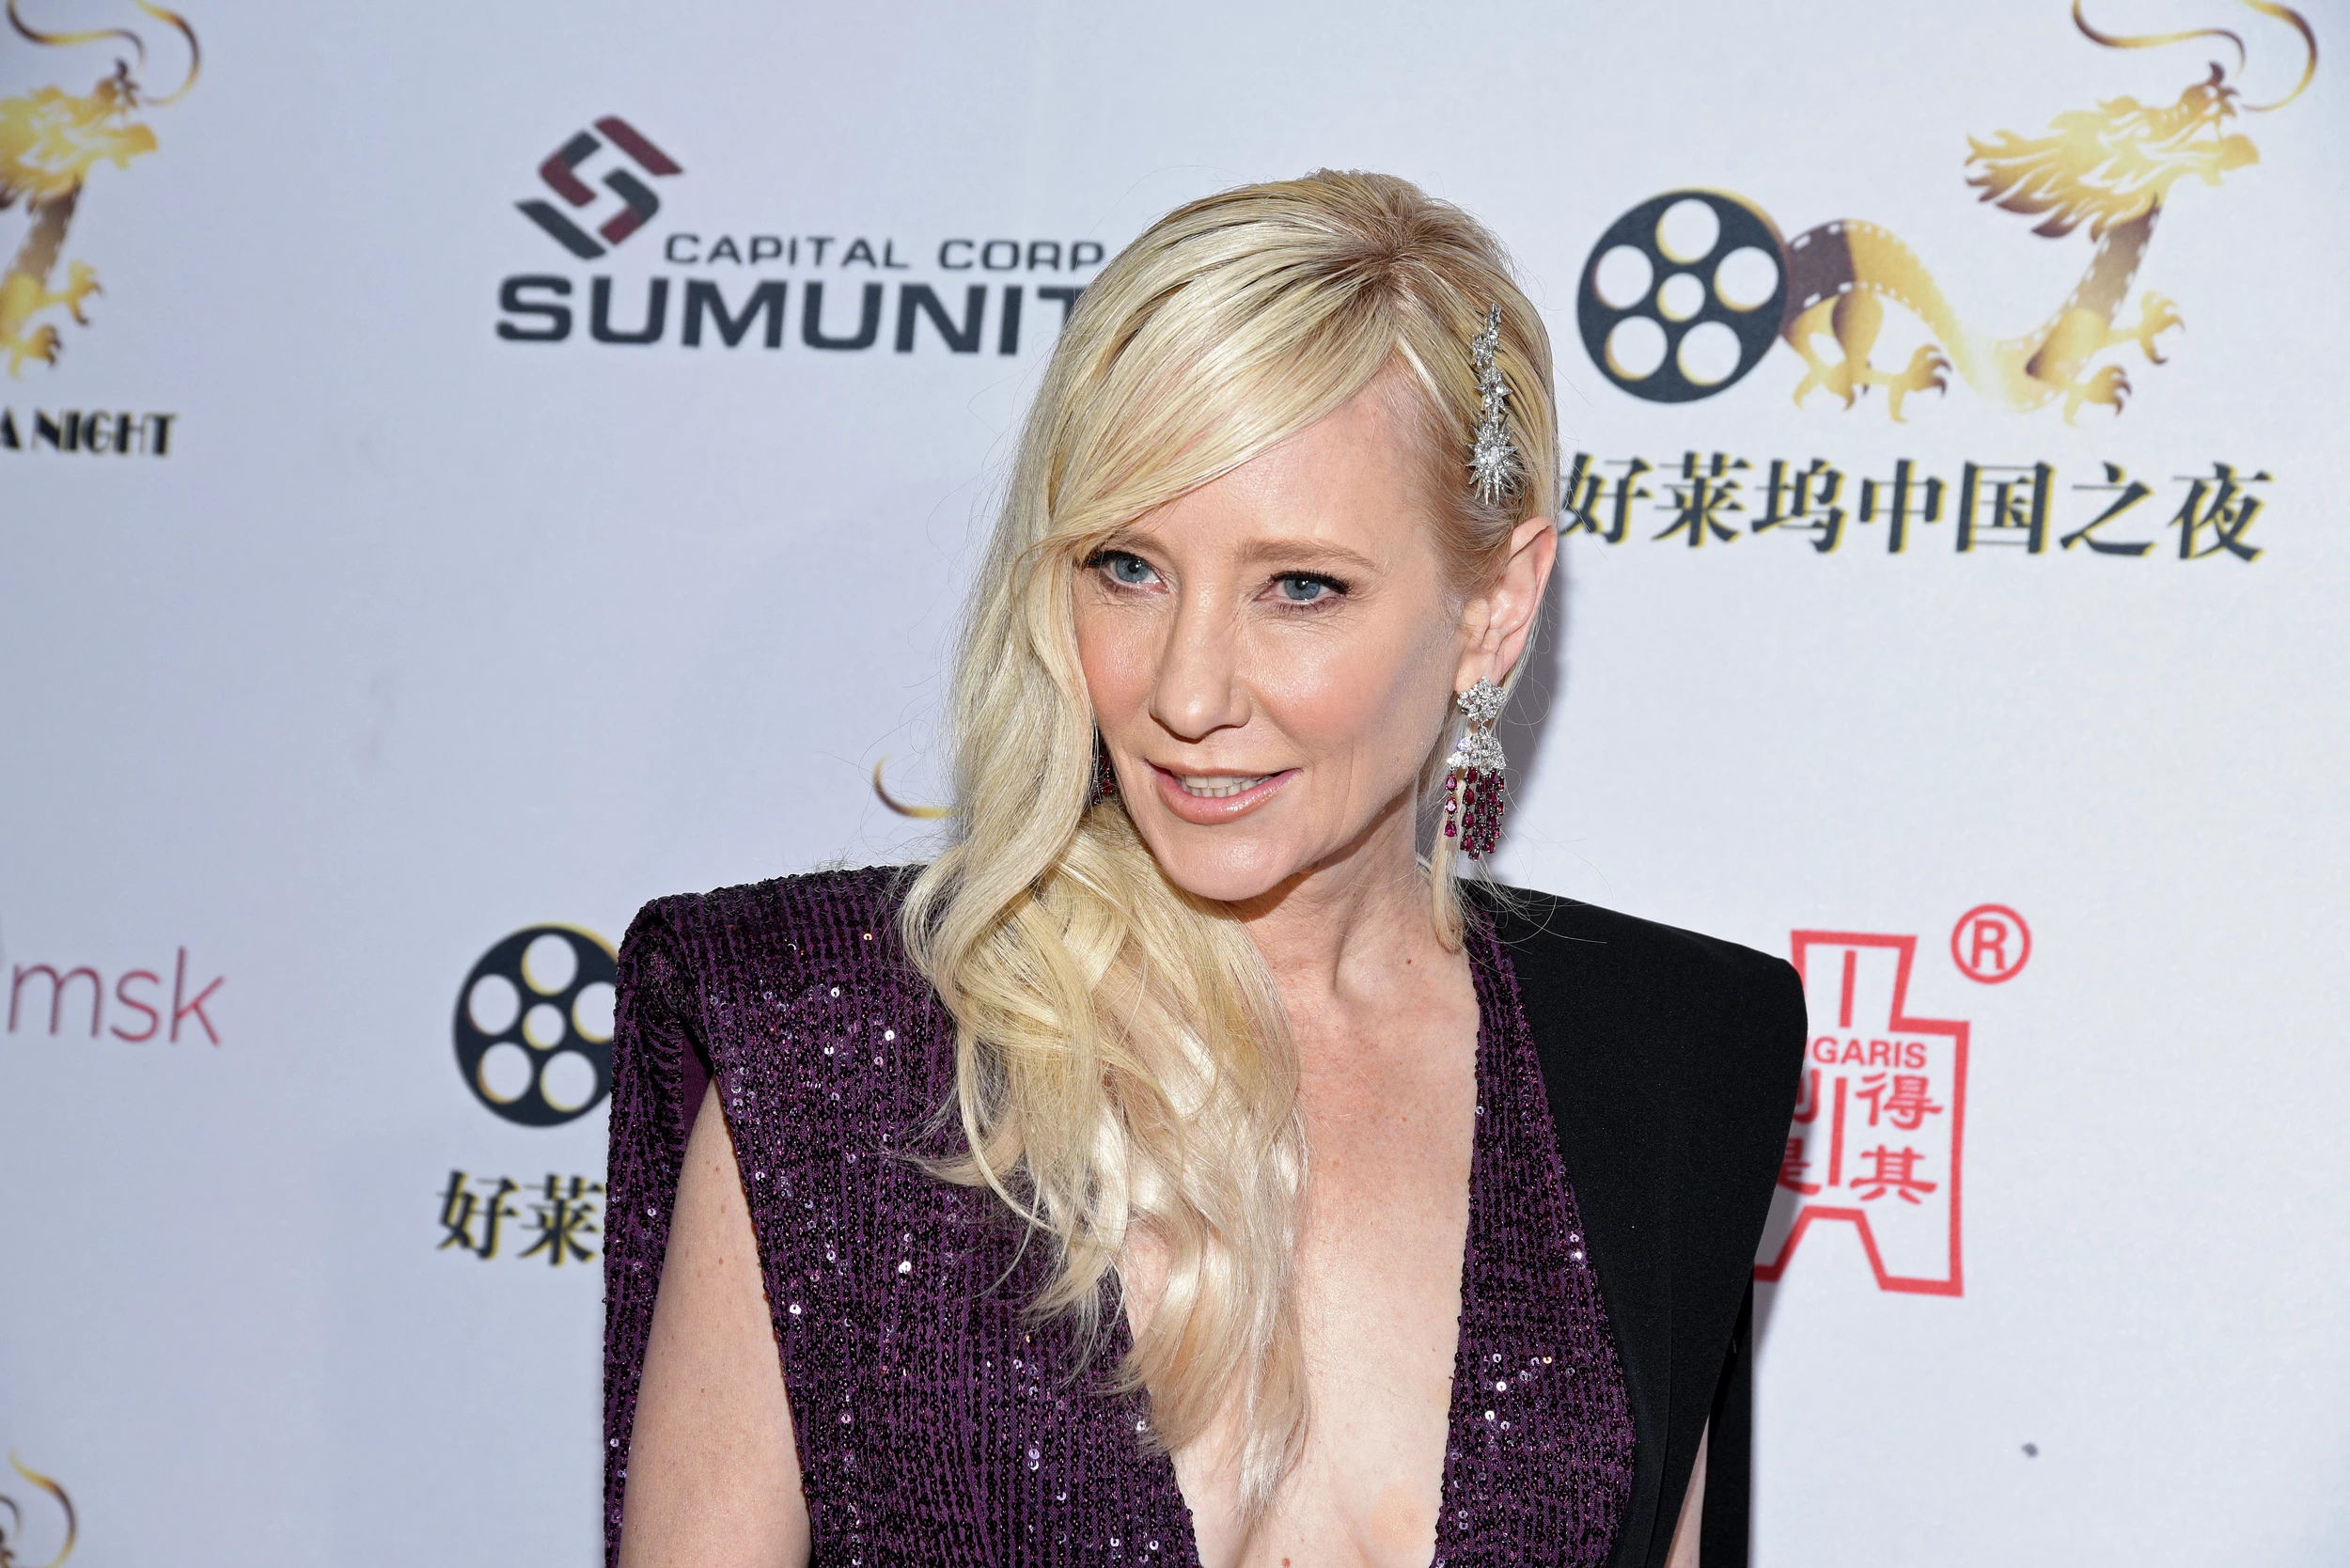 Anne Heche's traumatic time in NJ doesn't make up for behavior